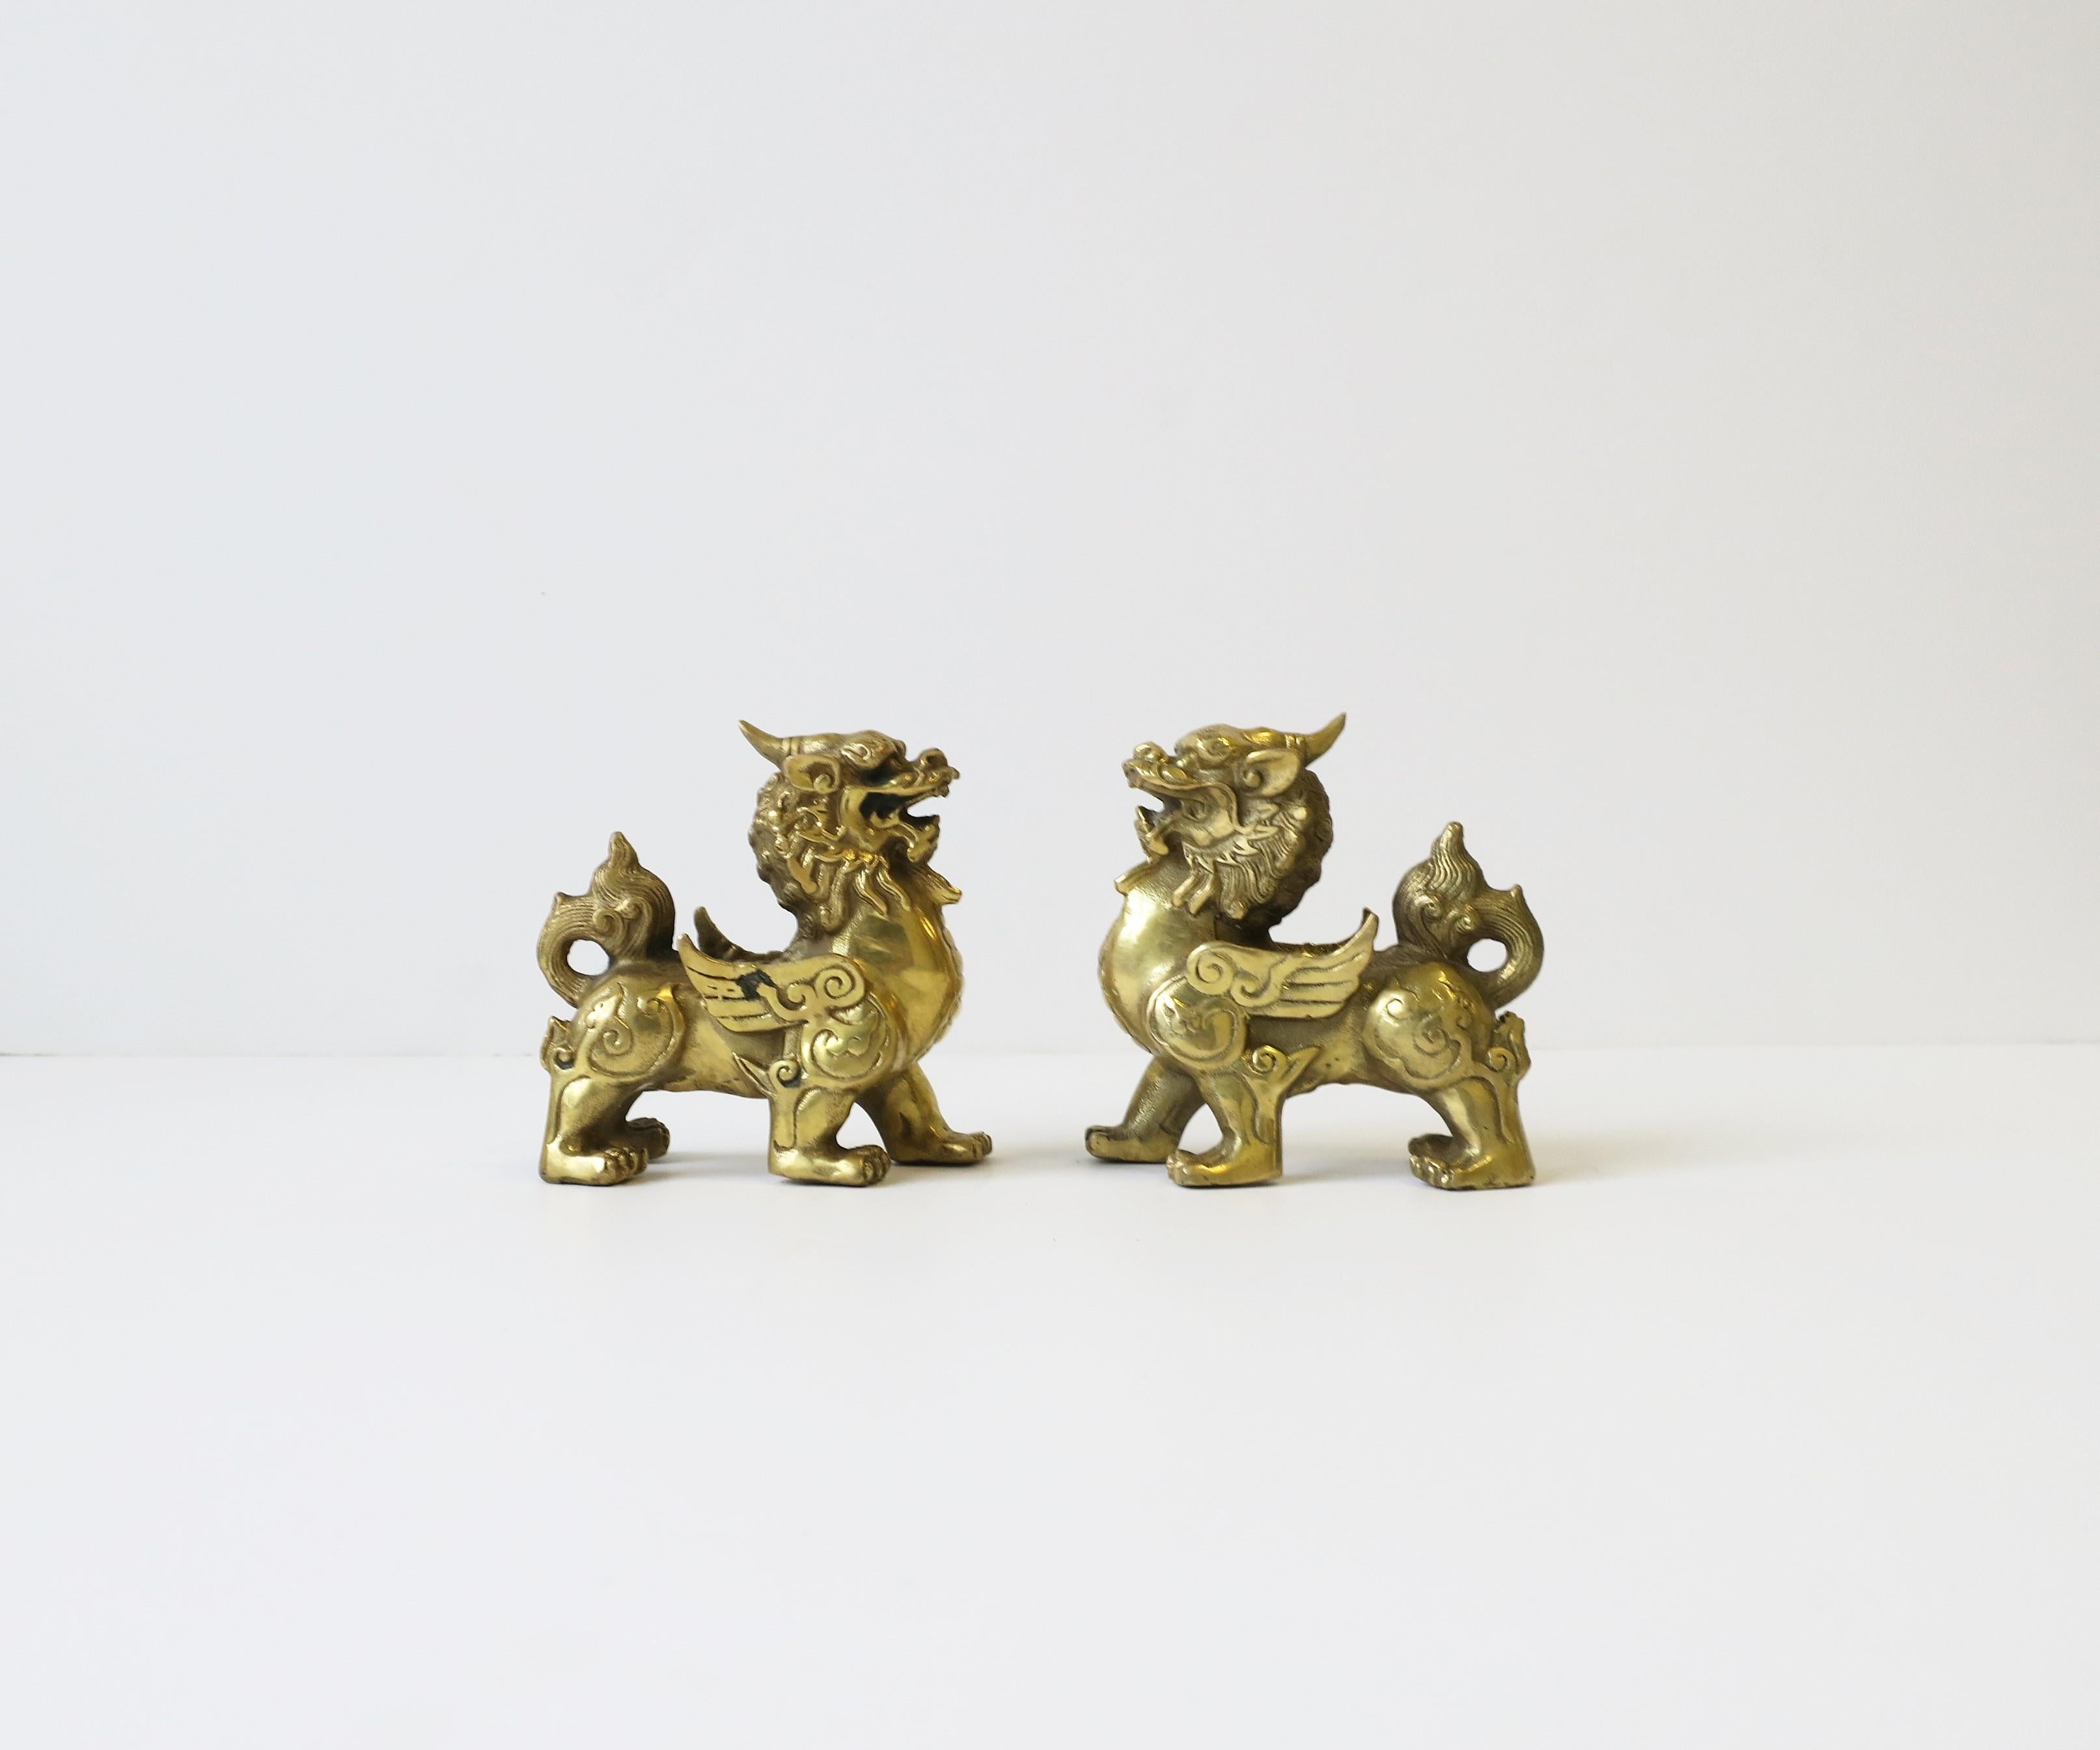 A great pair of gold brass Lion Foo dog sculptures/decorative objects, circa 20th century. Beautiful detail all around as shown in images. Dimensions: 2